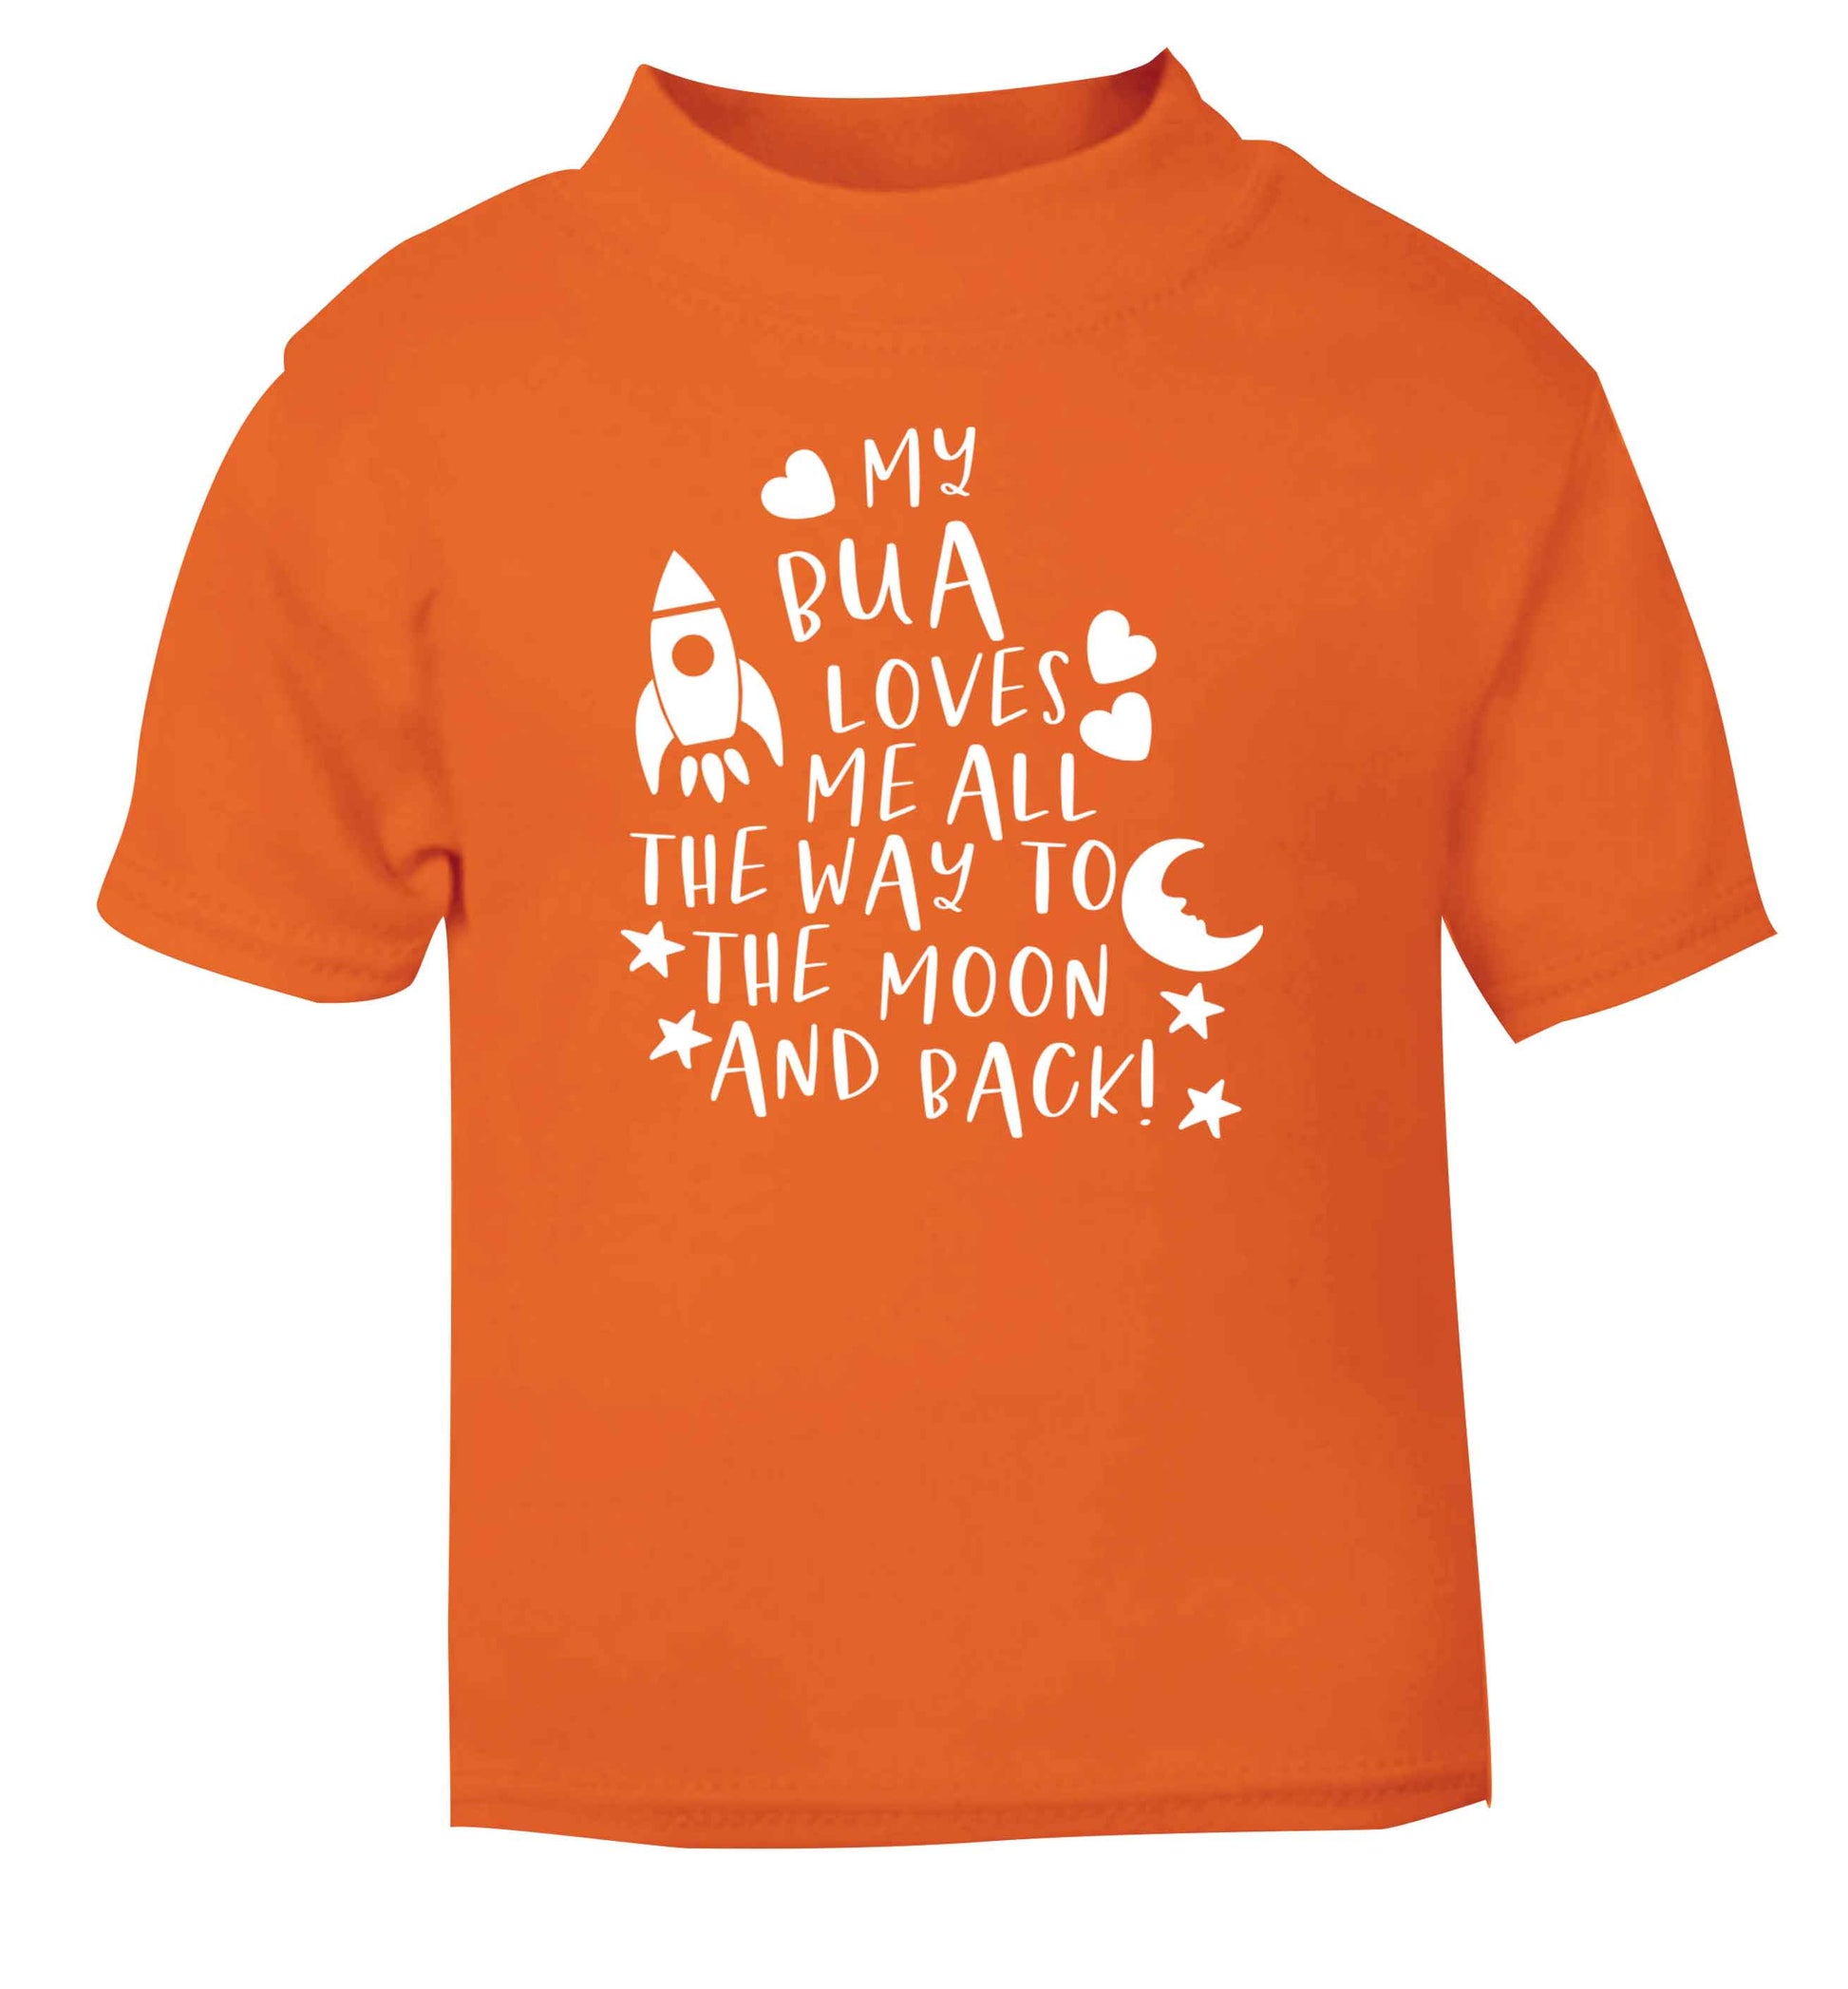 My bua loves me all they way to the moon and back orange Baby Toddler Tshirt 2 Years